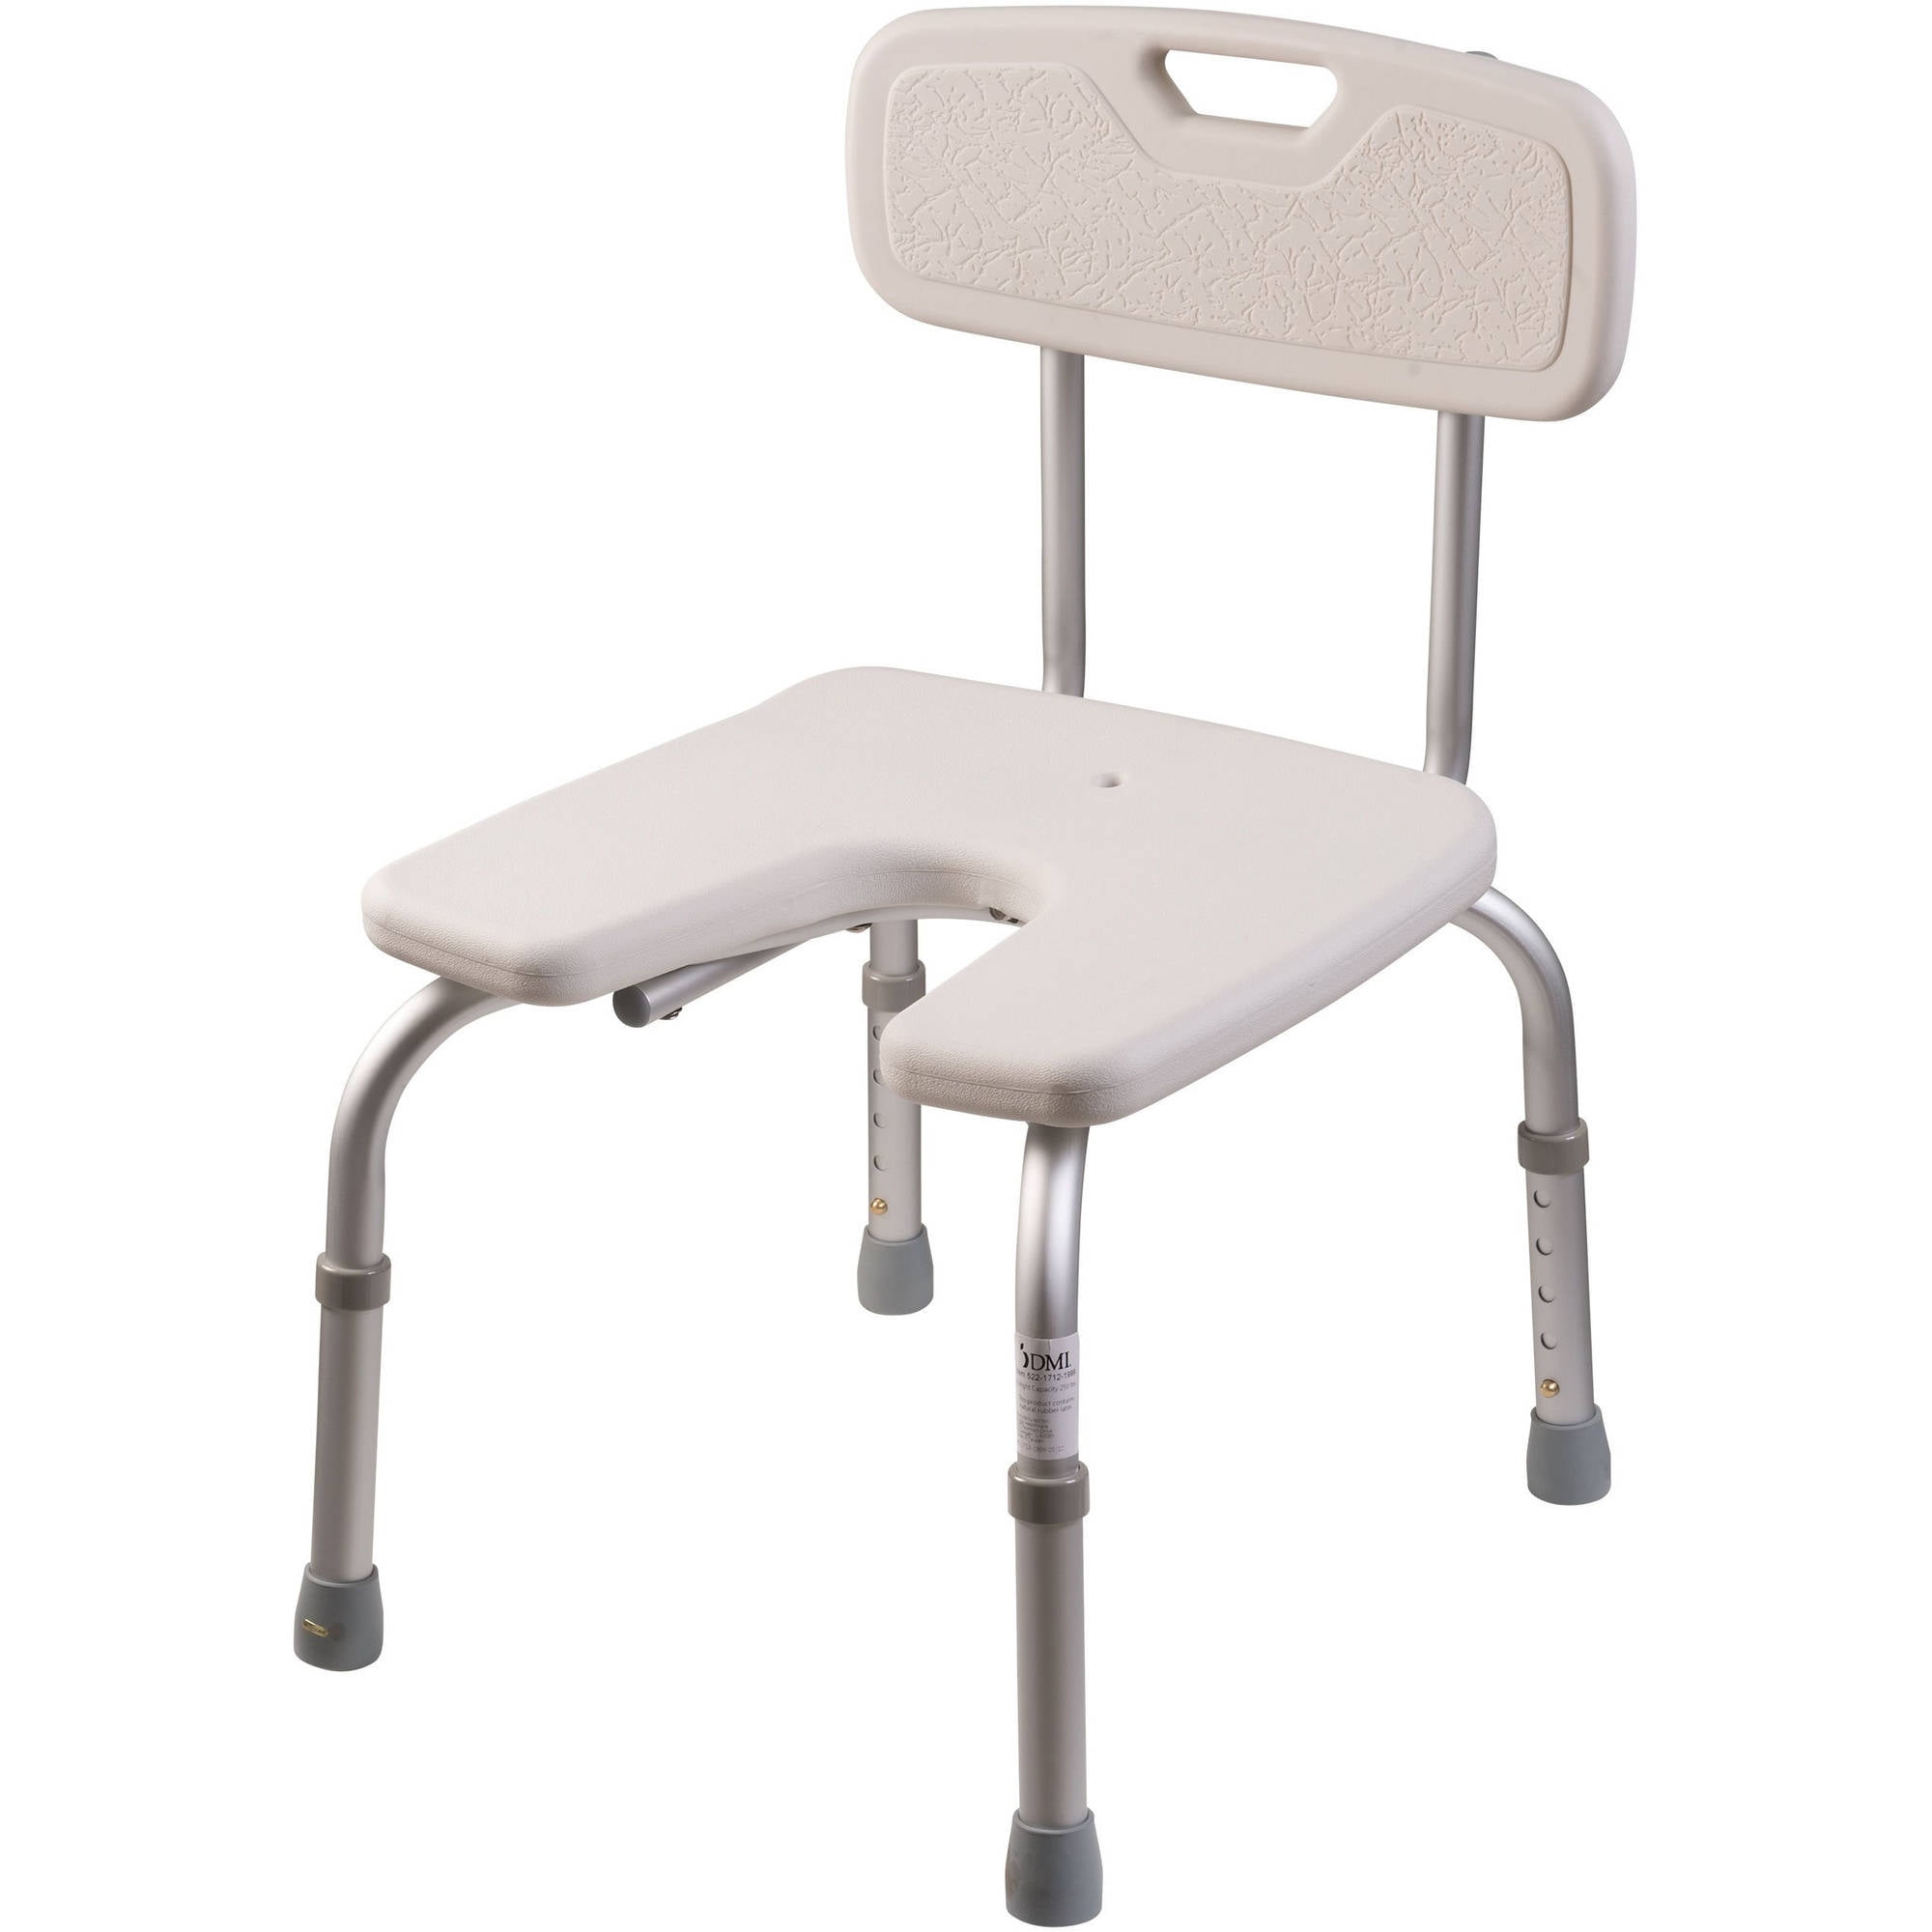 Shower Chair with Arms and Back Support Slip Bathroom disabled elderly 